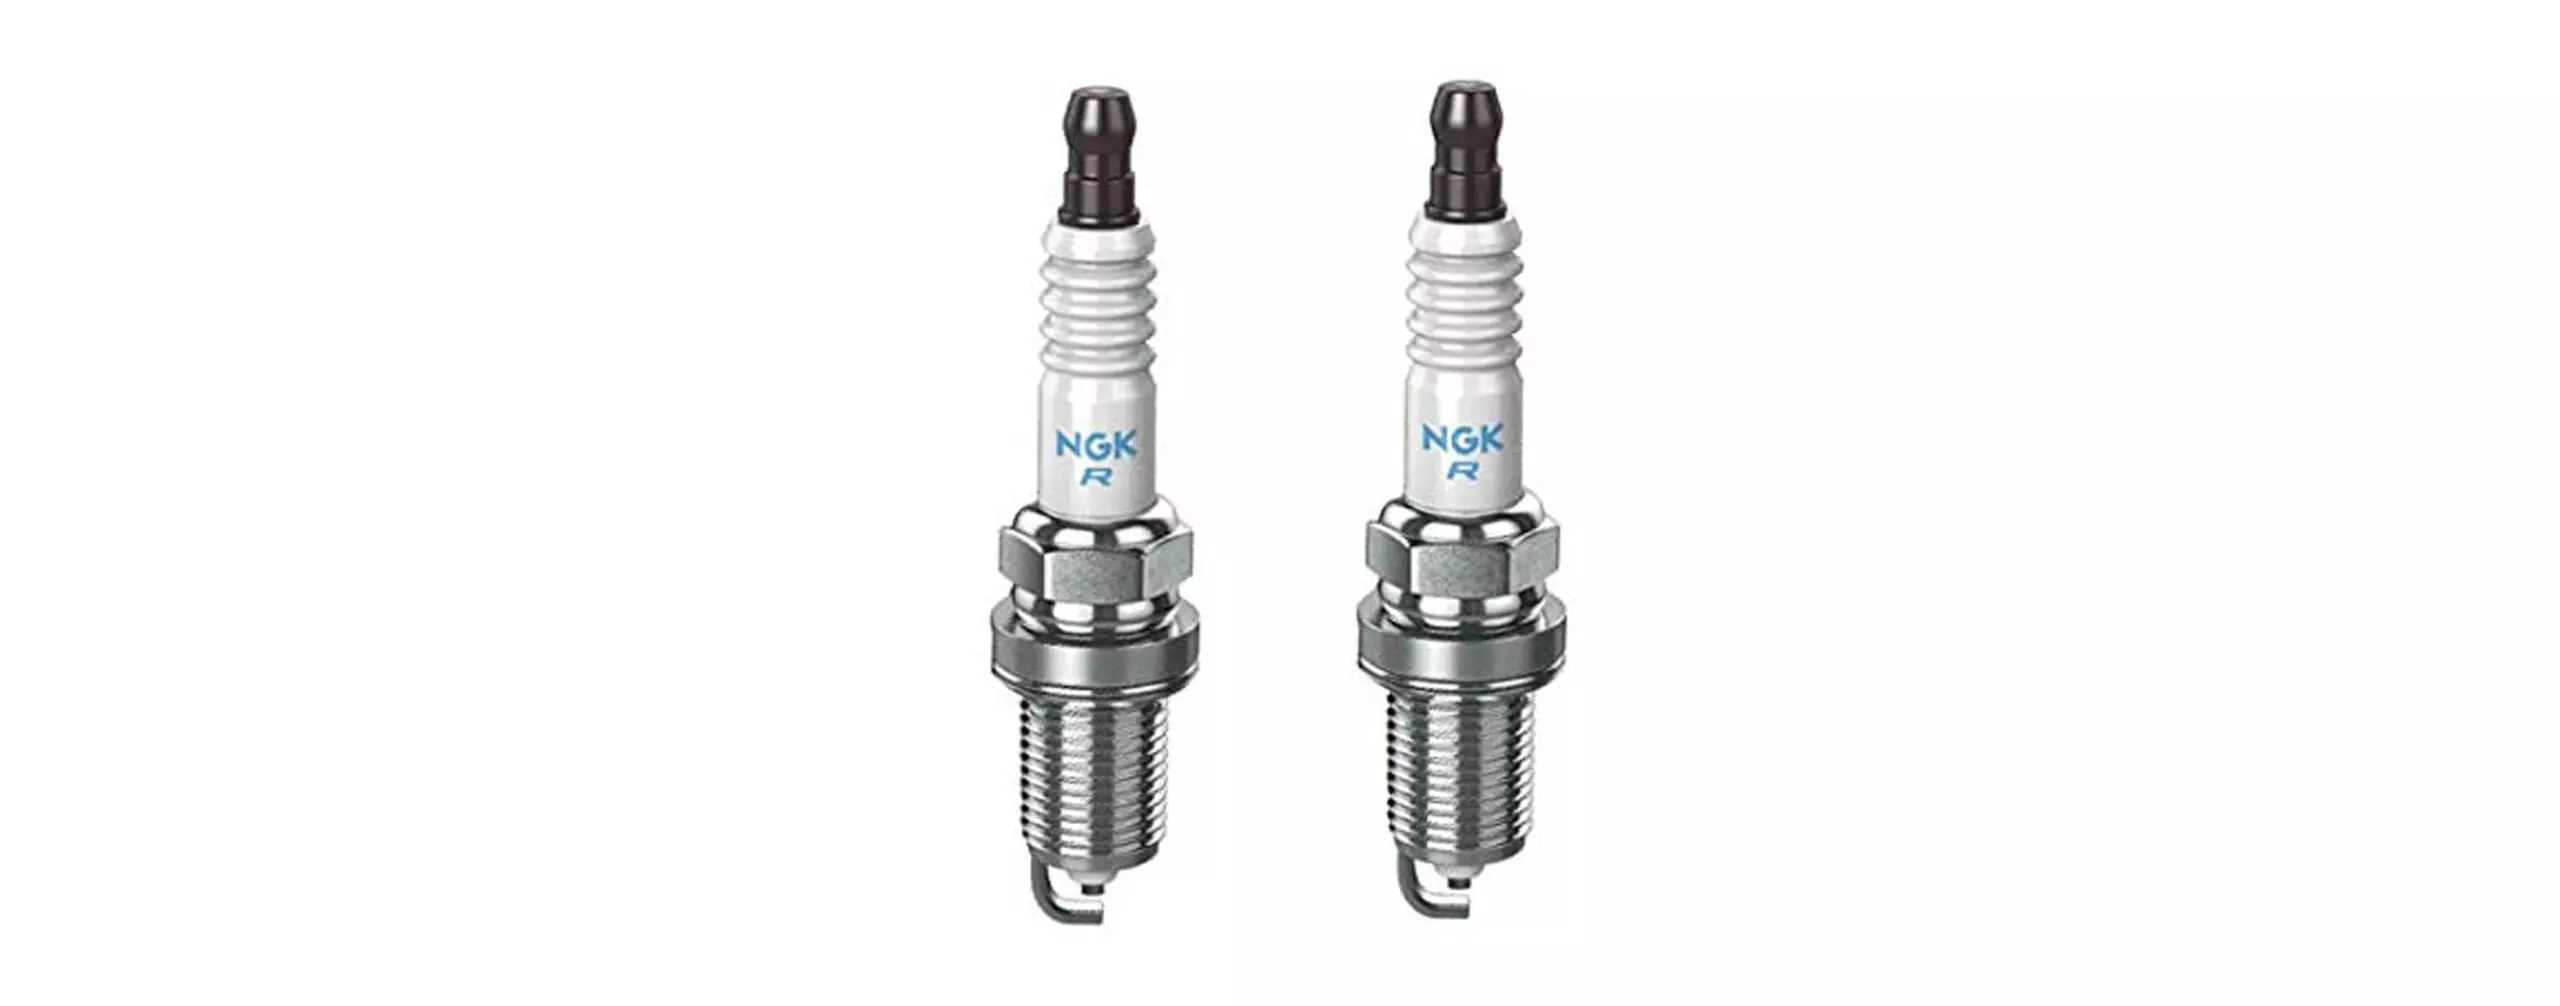 The Best Spark Plugs For Harley-Davidsons (Review & Buying Guide) in 2022